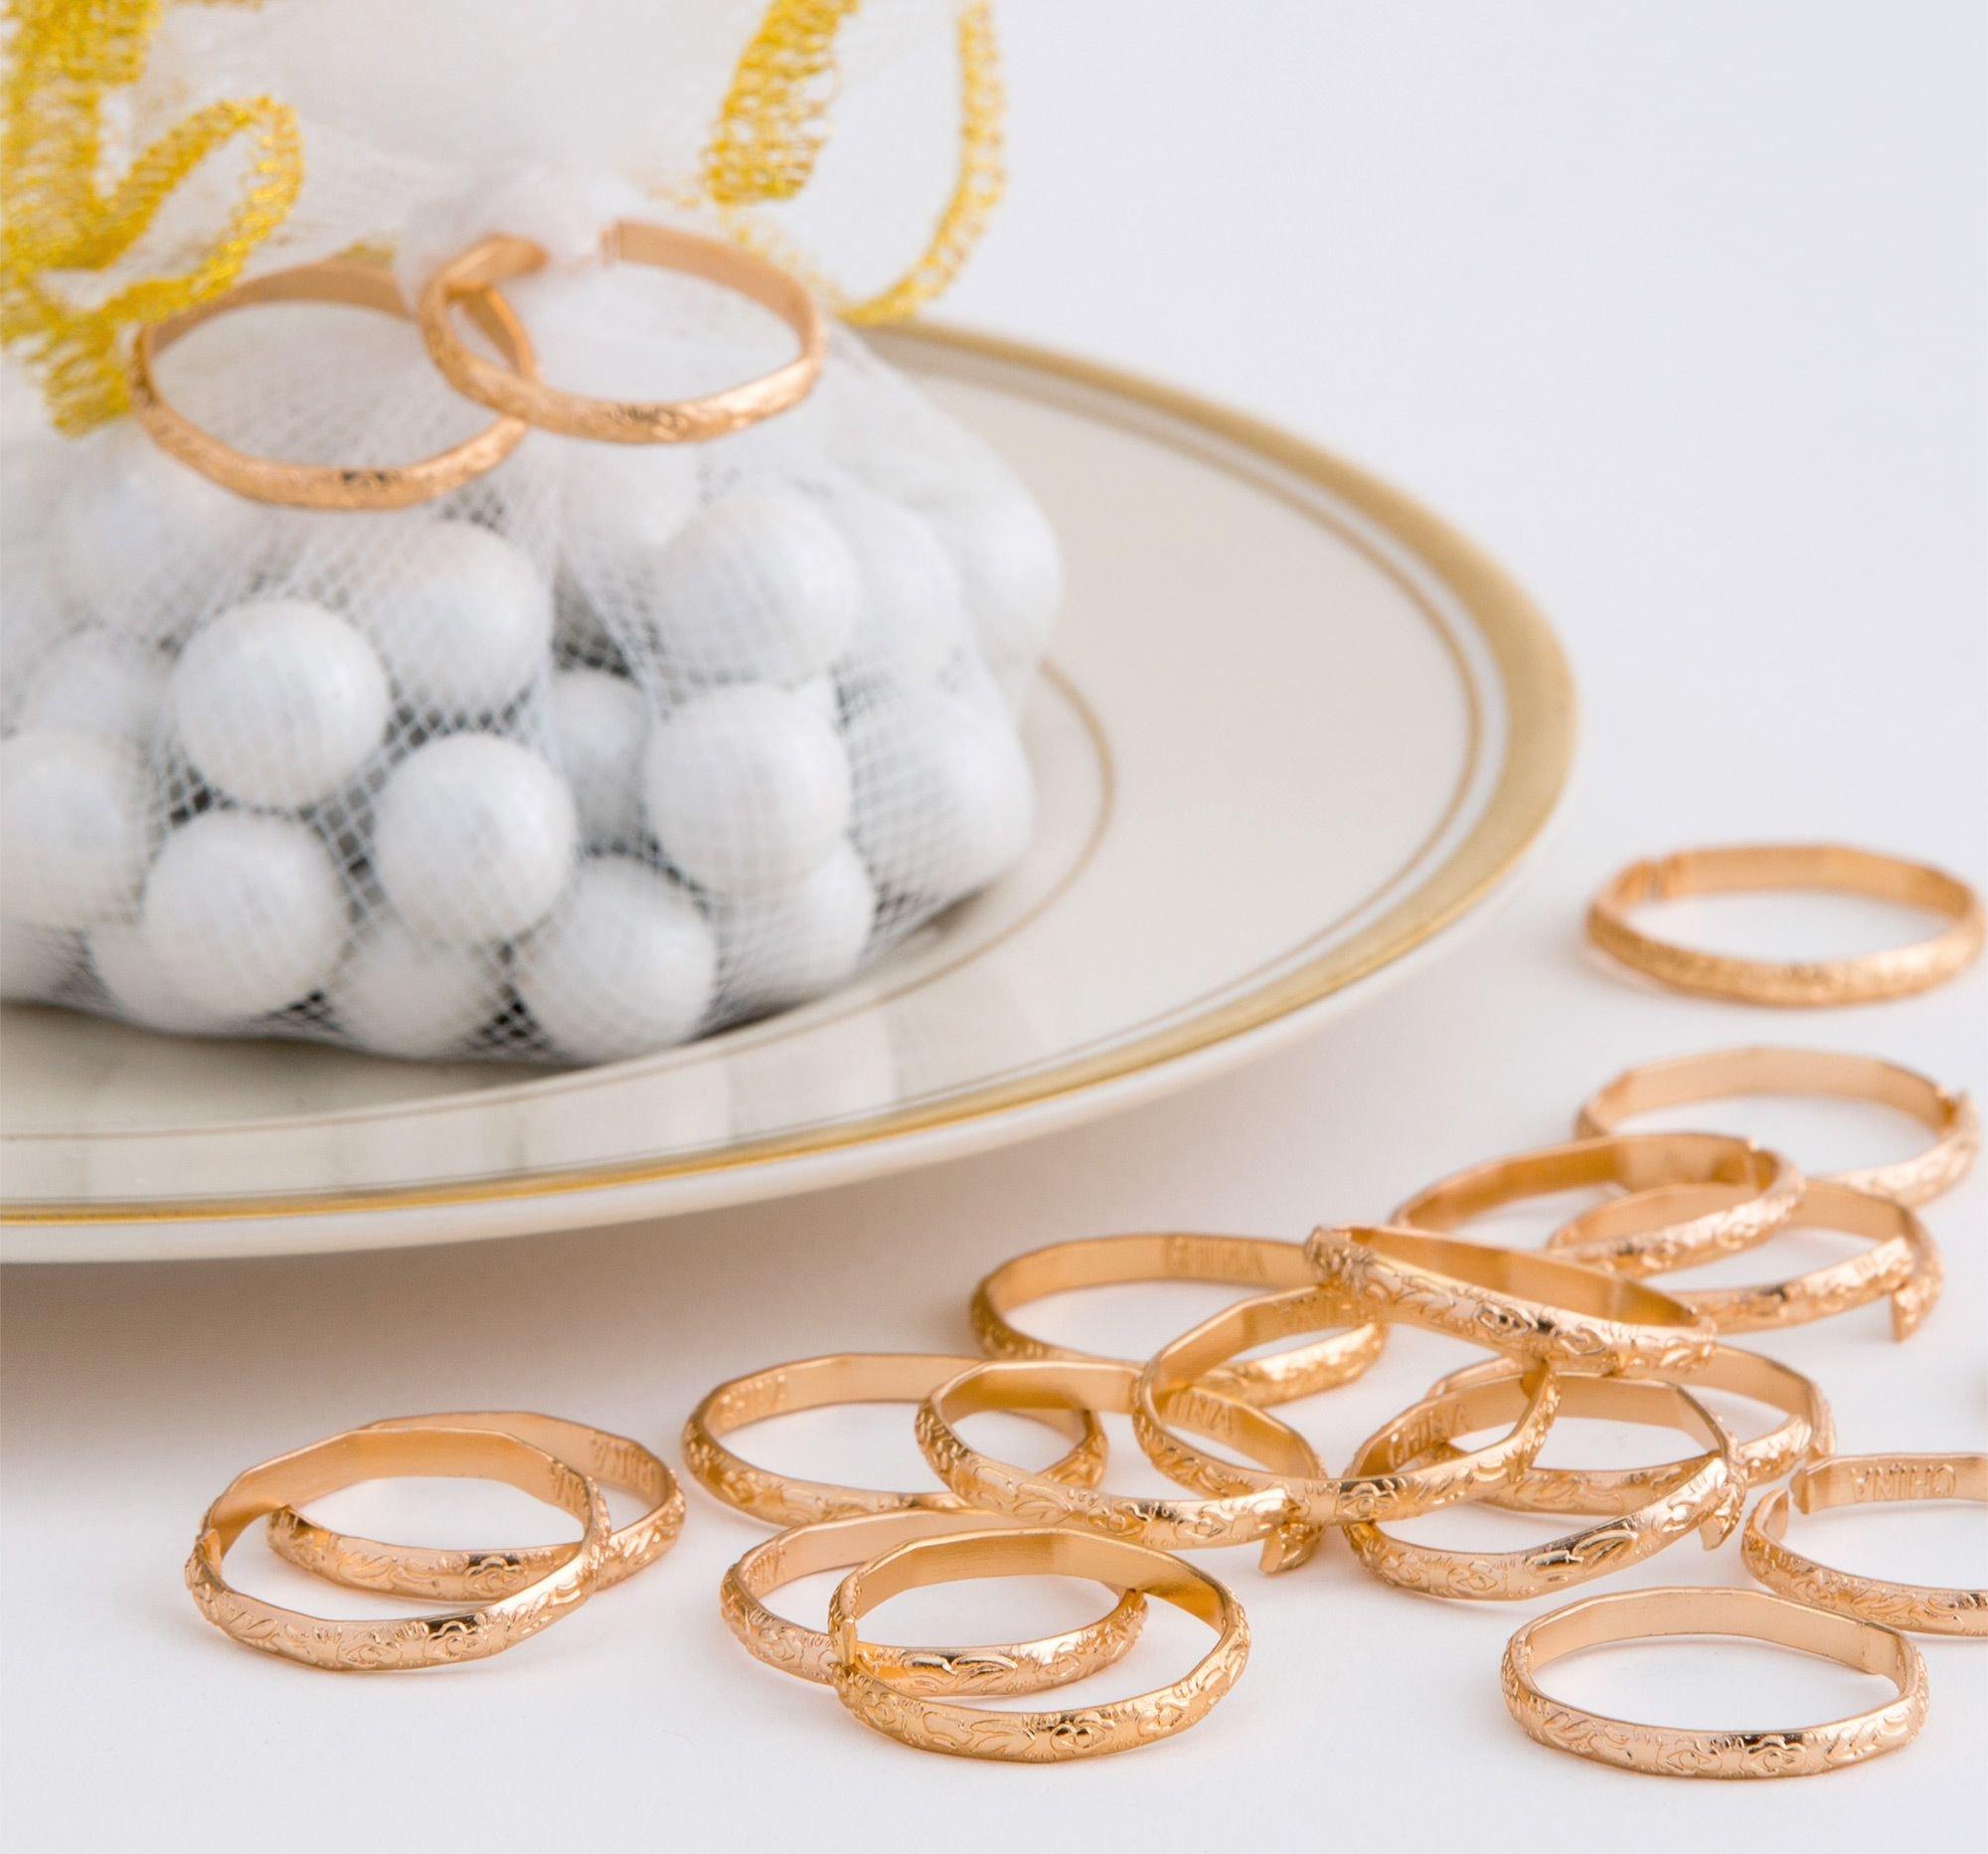 Wedding Ring Party Favors